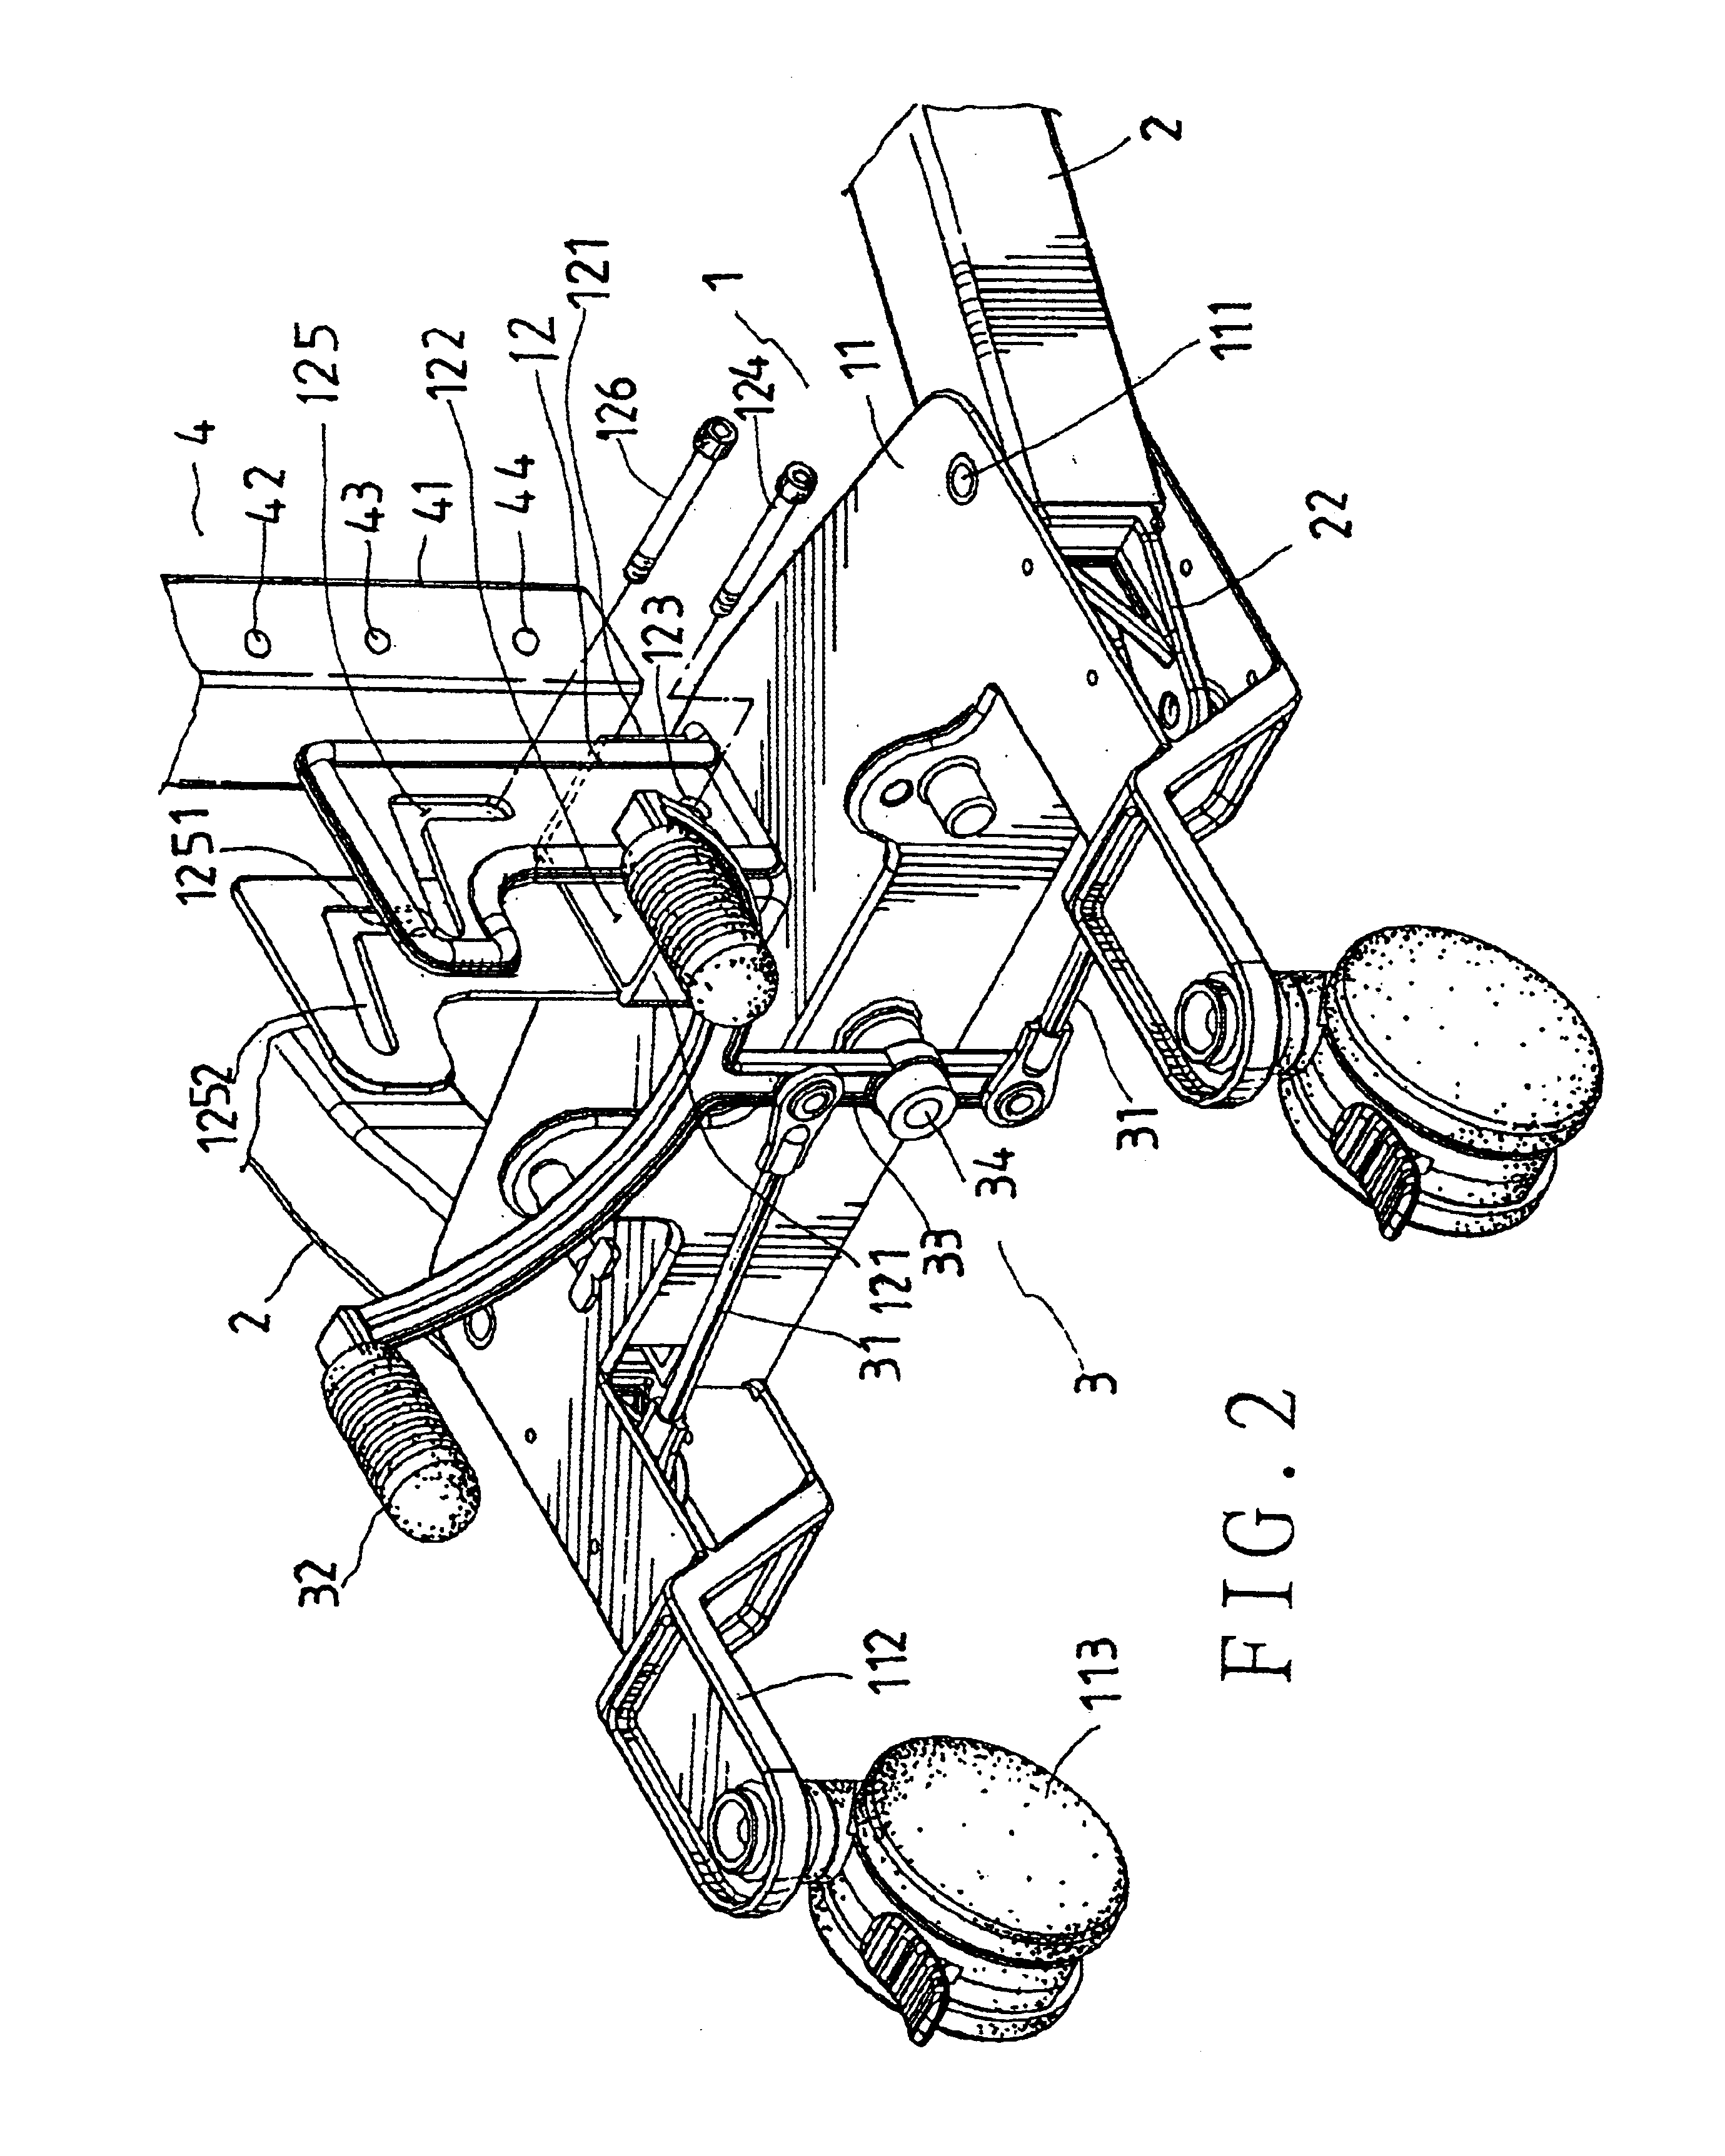 Foldable lift and transfer apparatus for patient